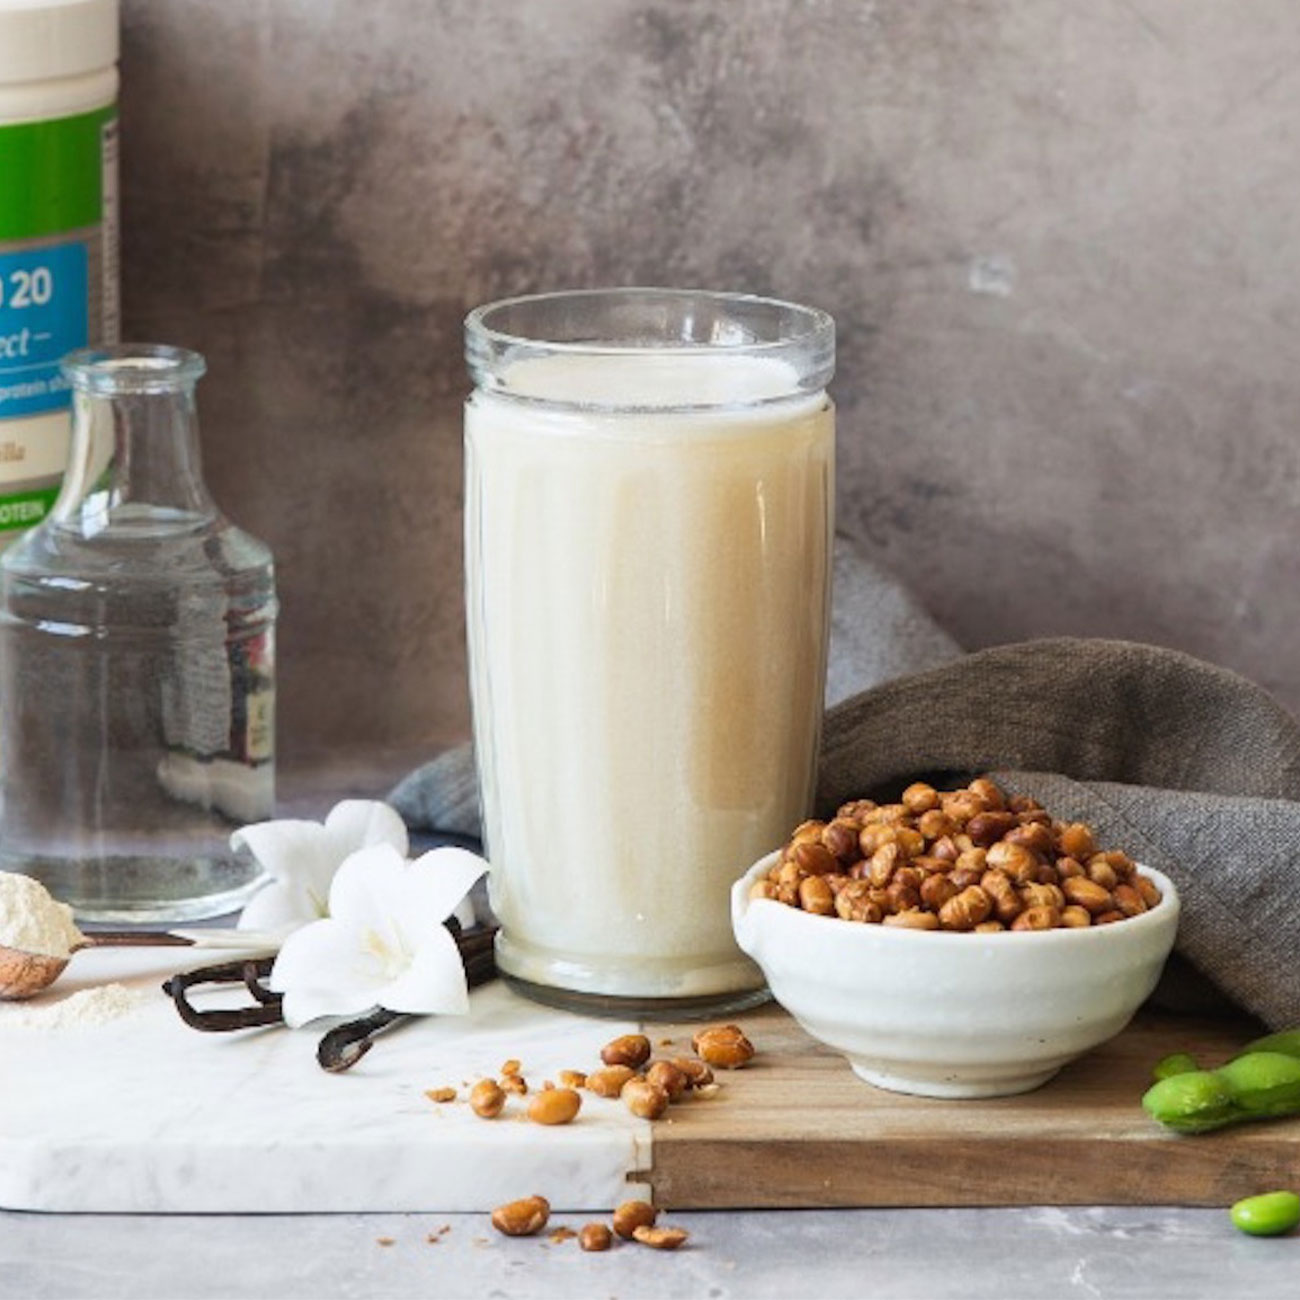 Glass of Pro20 Select protein drink and a bowl of roasted soy beans